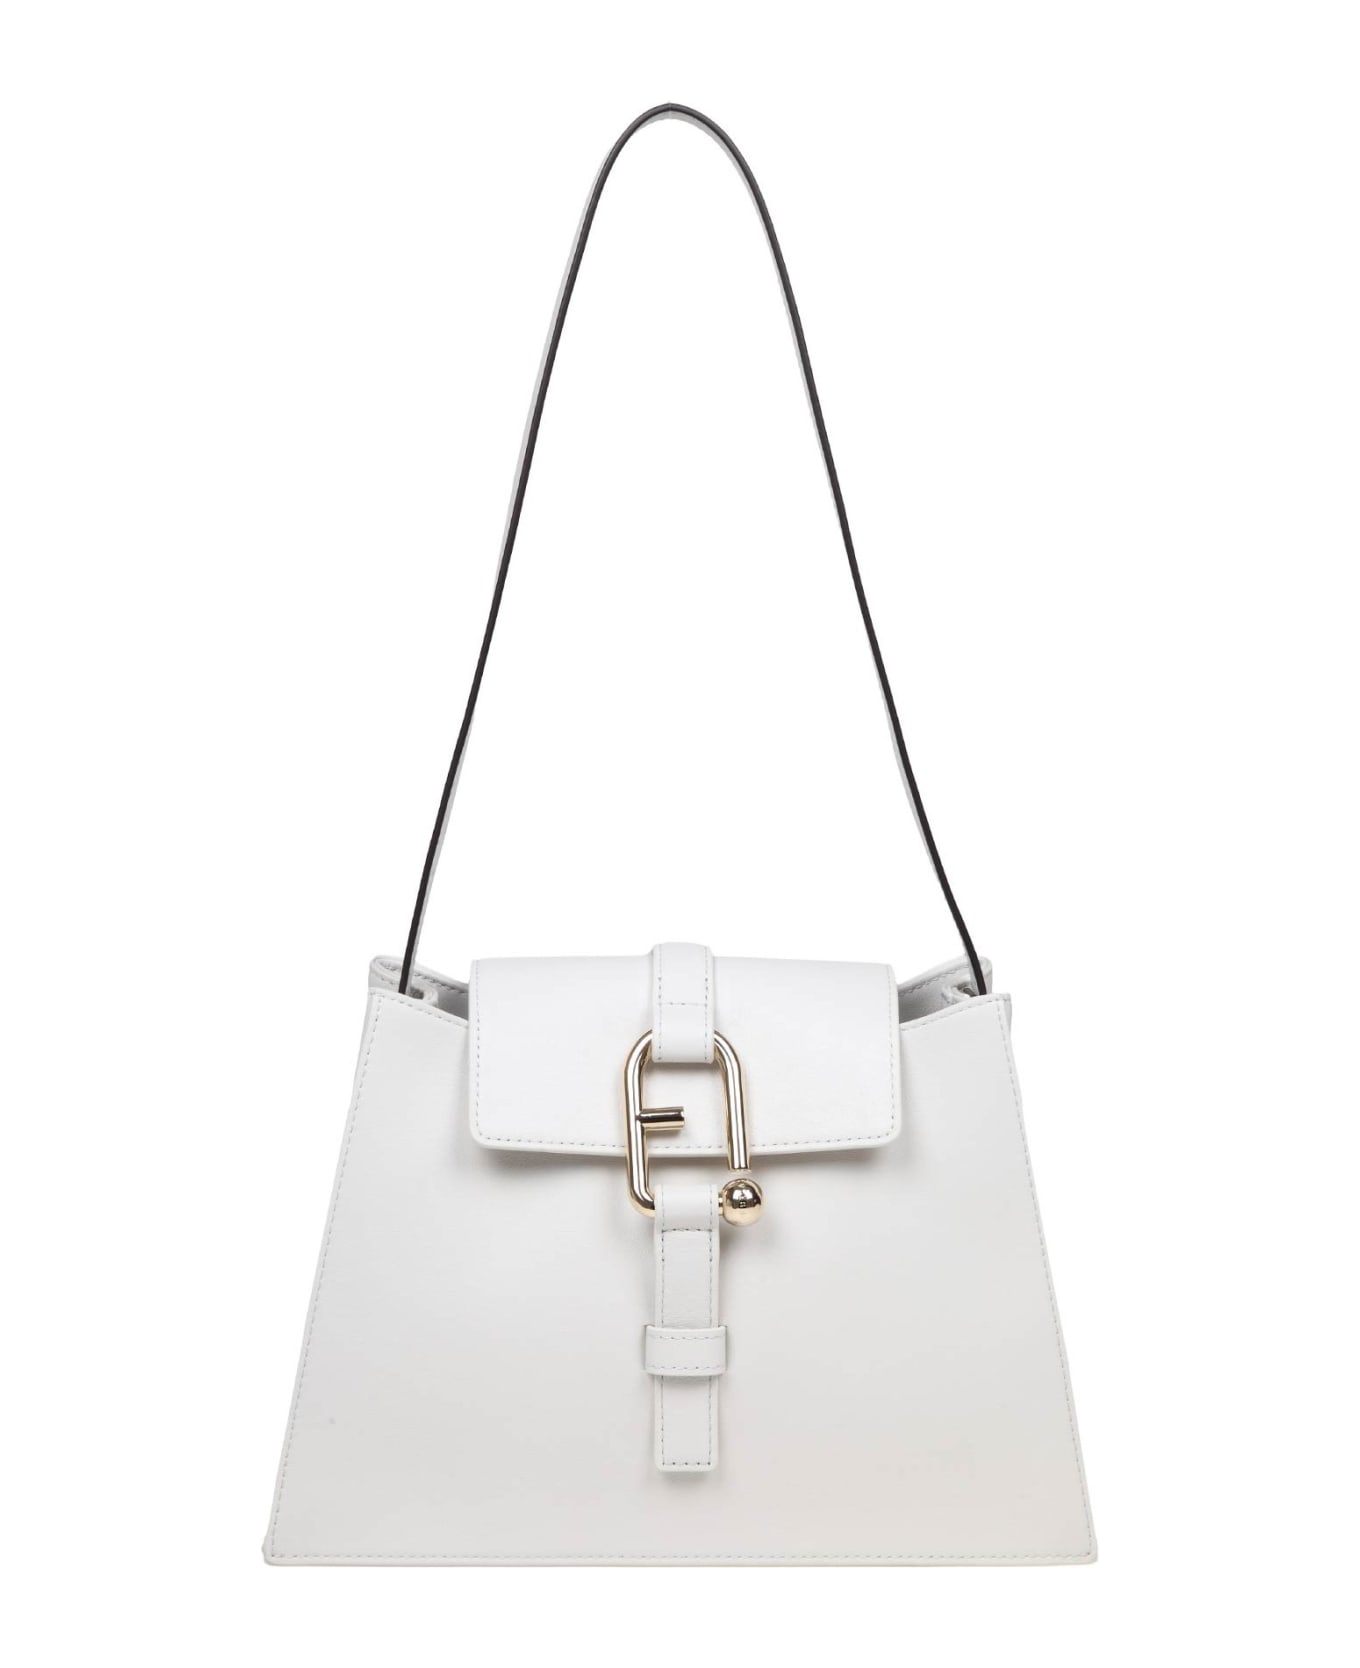 Furla Nuvola S Shoulder Bag In Marshmallow Color Leather - Marshmallow